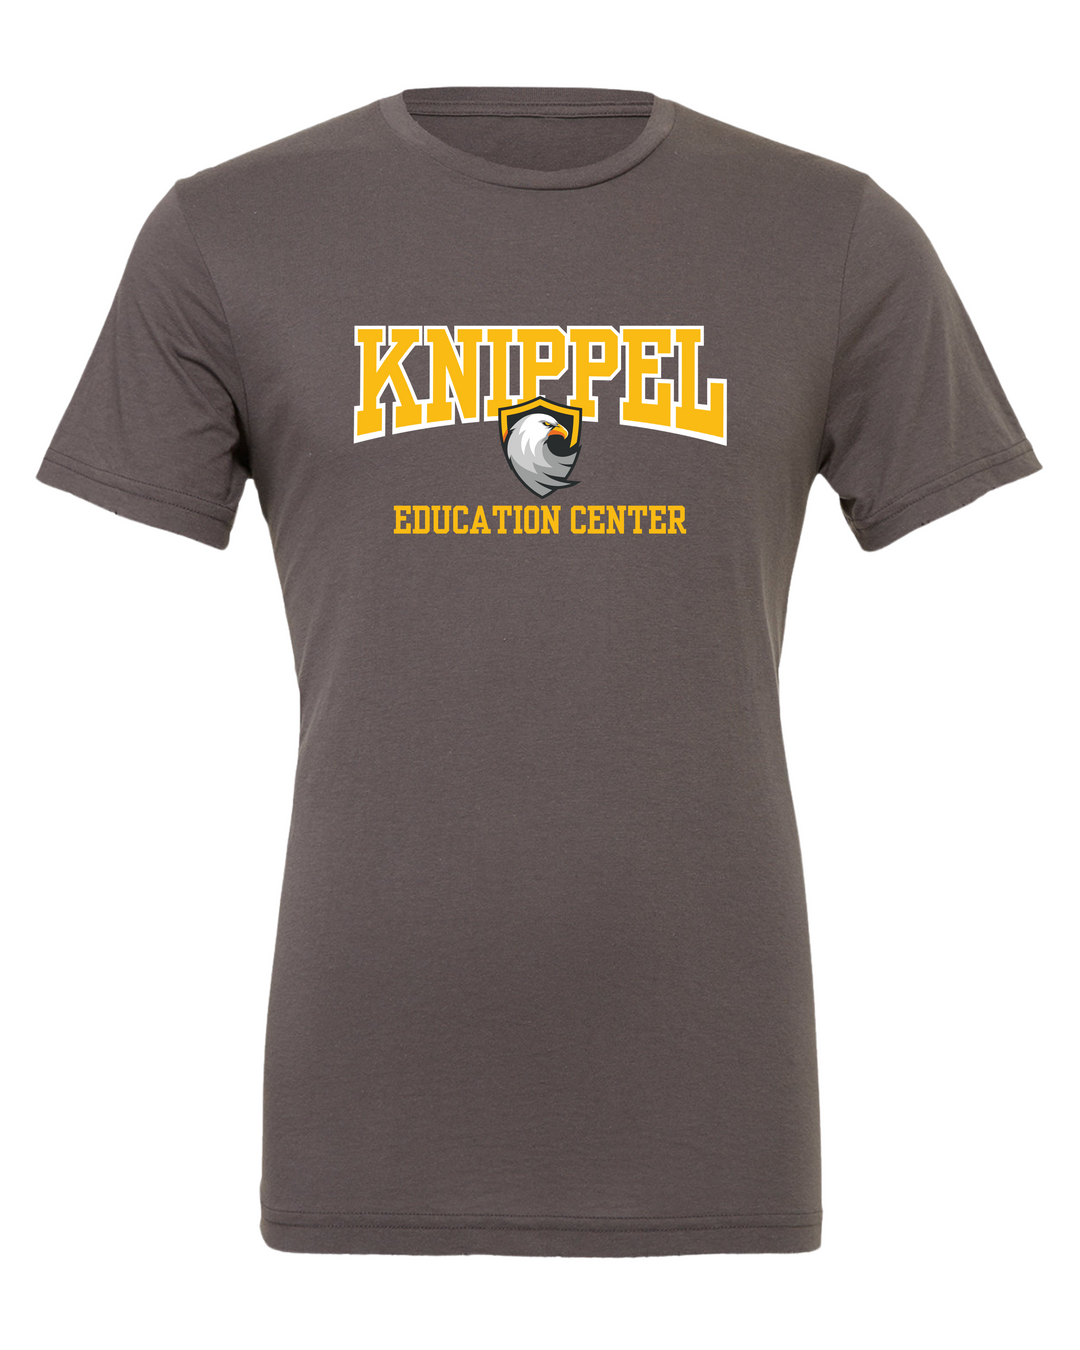 Knippel Education Center